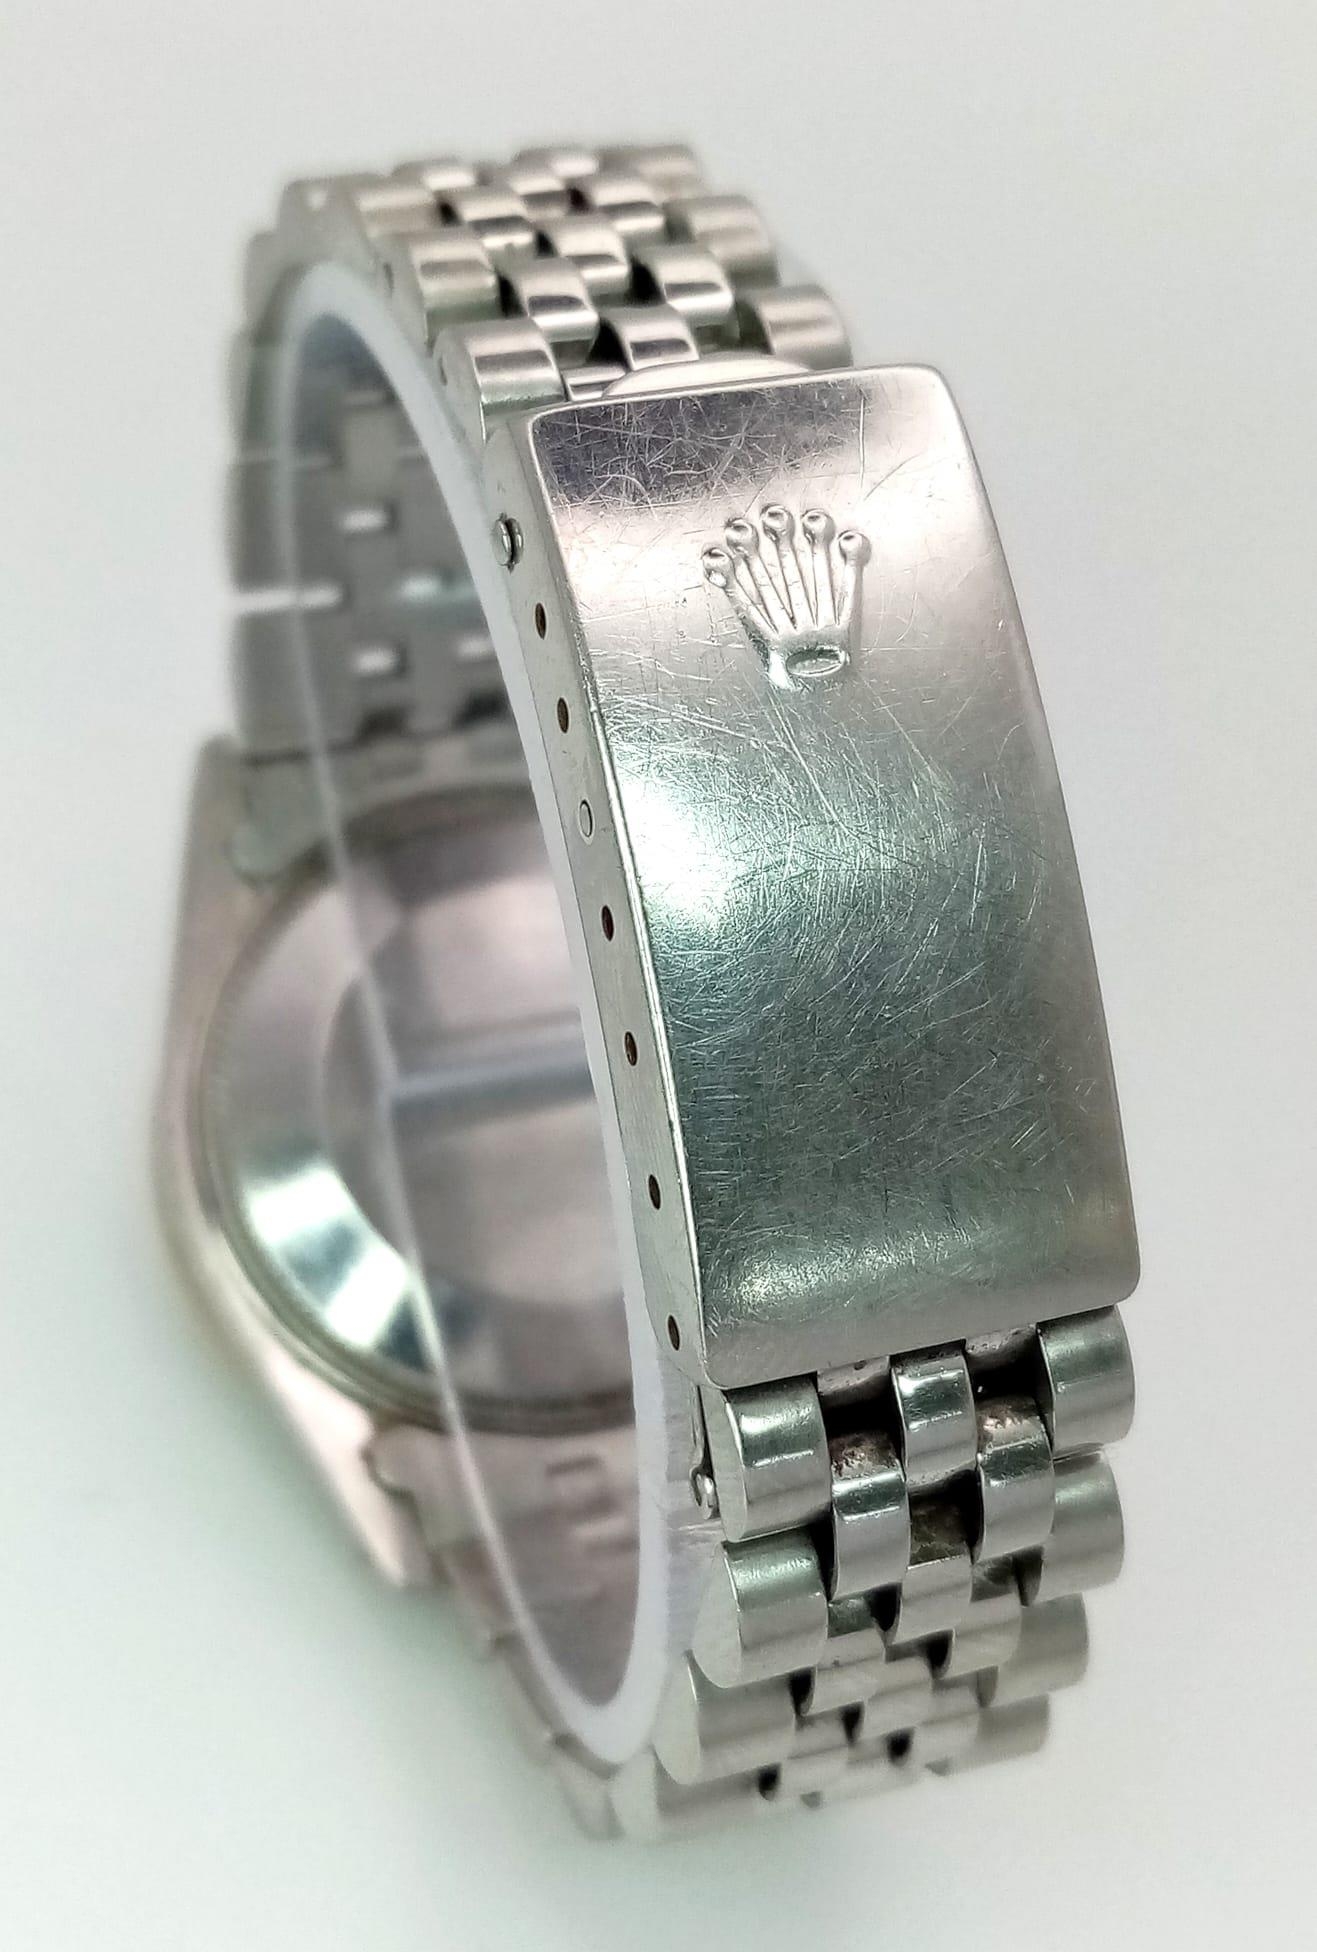 A LADIES ROLEX DRESS WATCH WITH DIAMOND NUMERALS AND BEZEL , MOTHER OF PEARL DIAL AND AUTOMATIC - Image 7 of 10